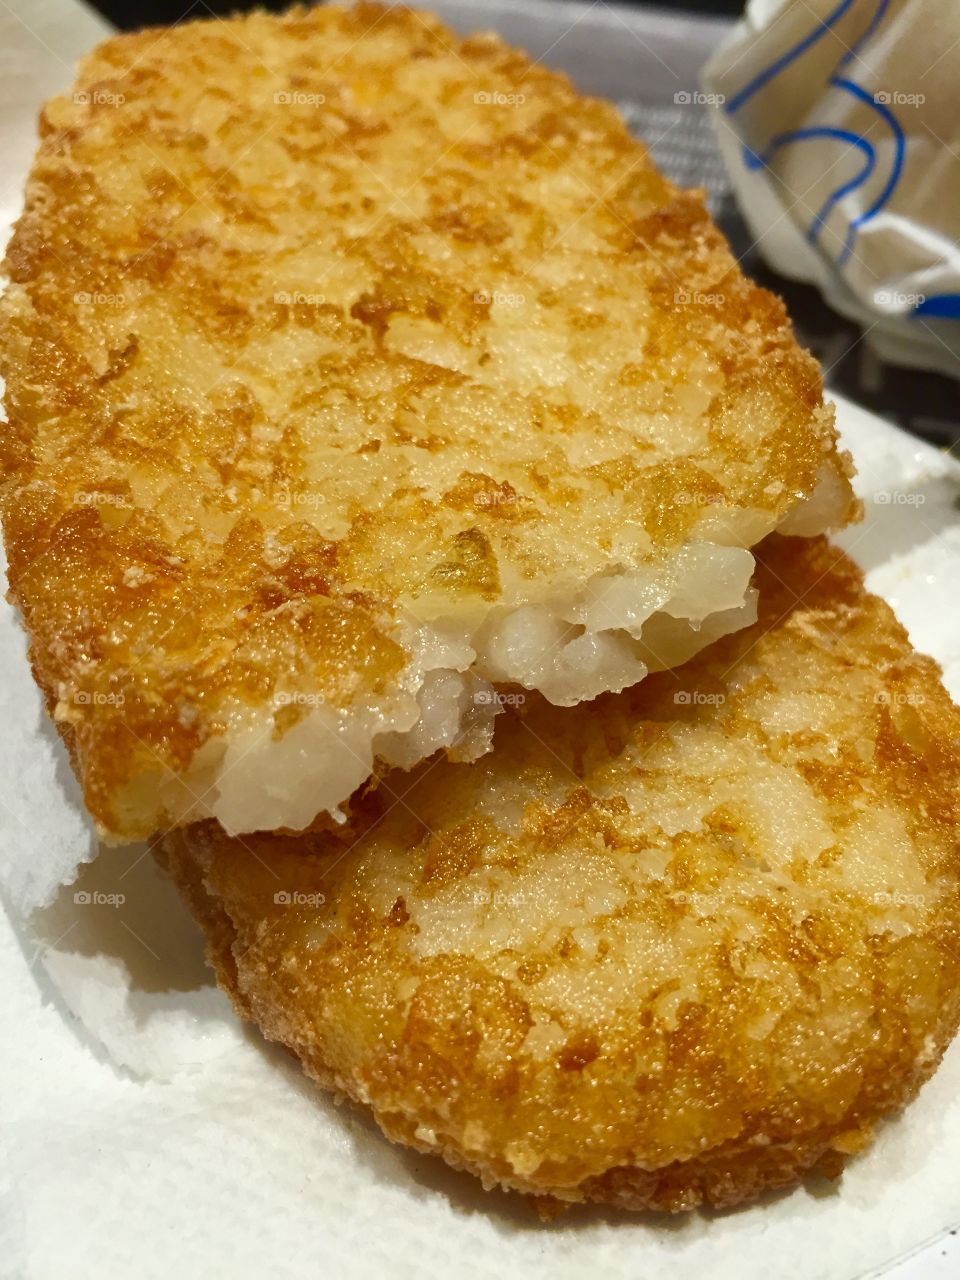 Hashbrown. Two delicious hashbrowns